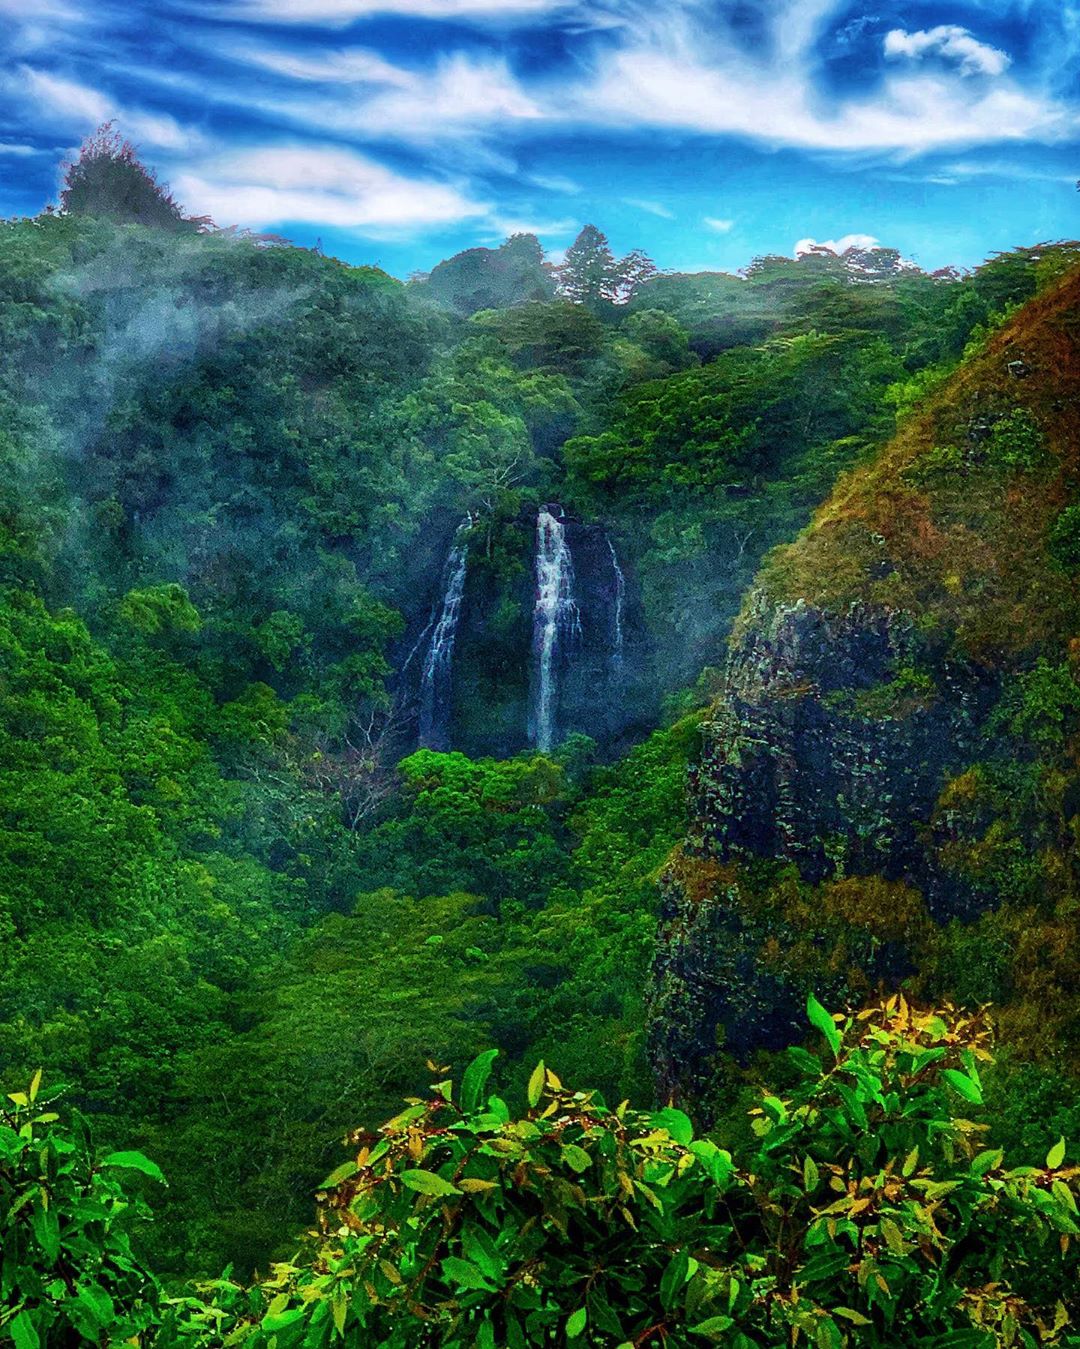 Waterfall inside a rainforest in Kapa'a. Photo by Instagram user@worldfrommycamera_ra